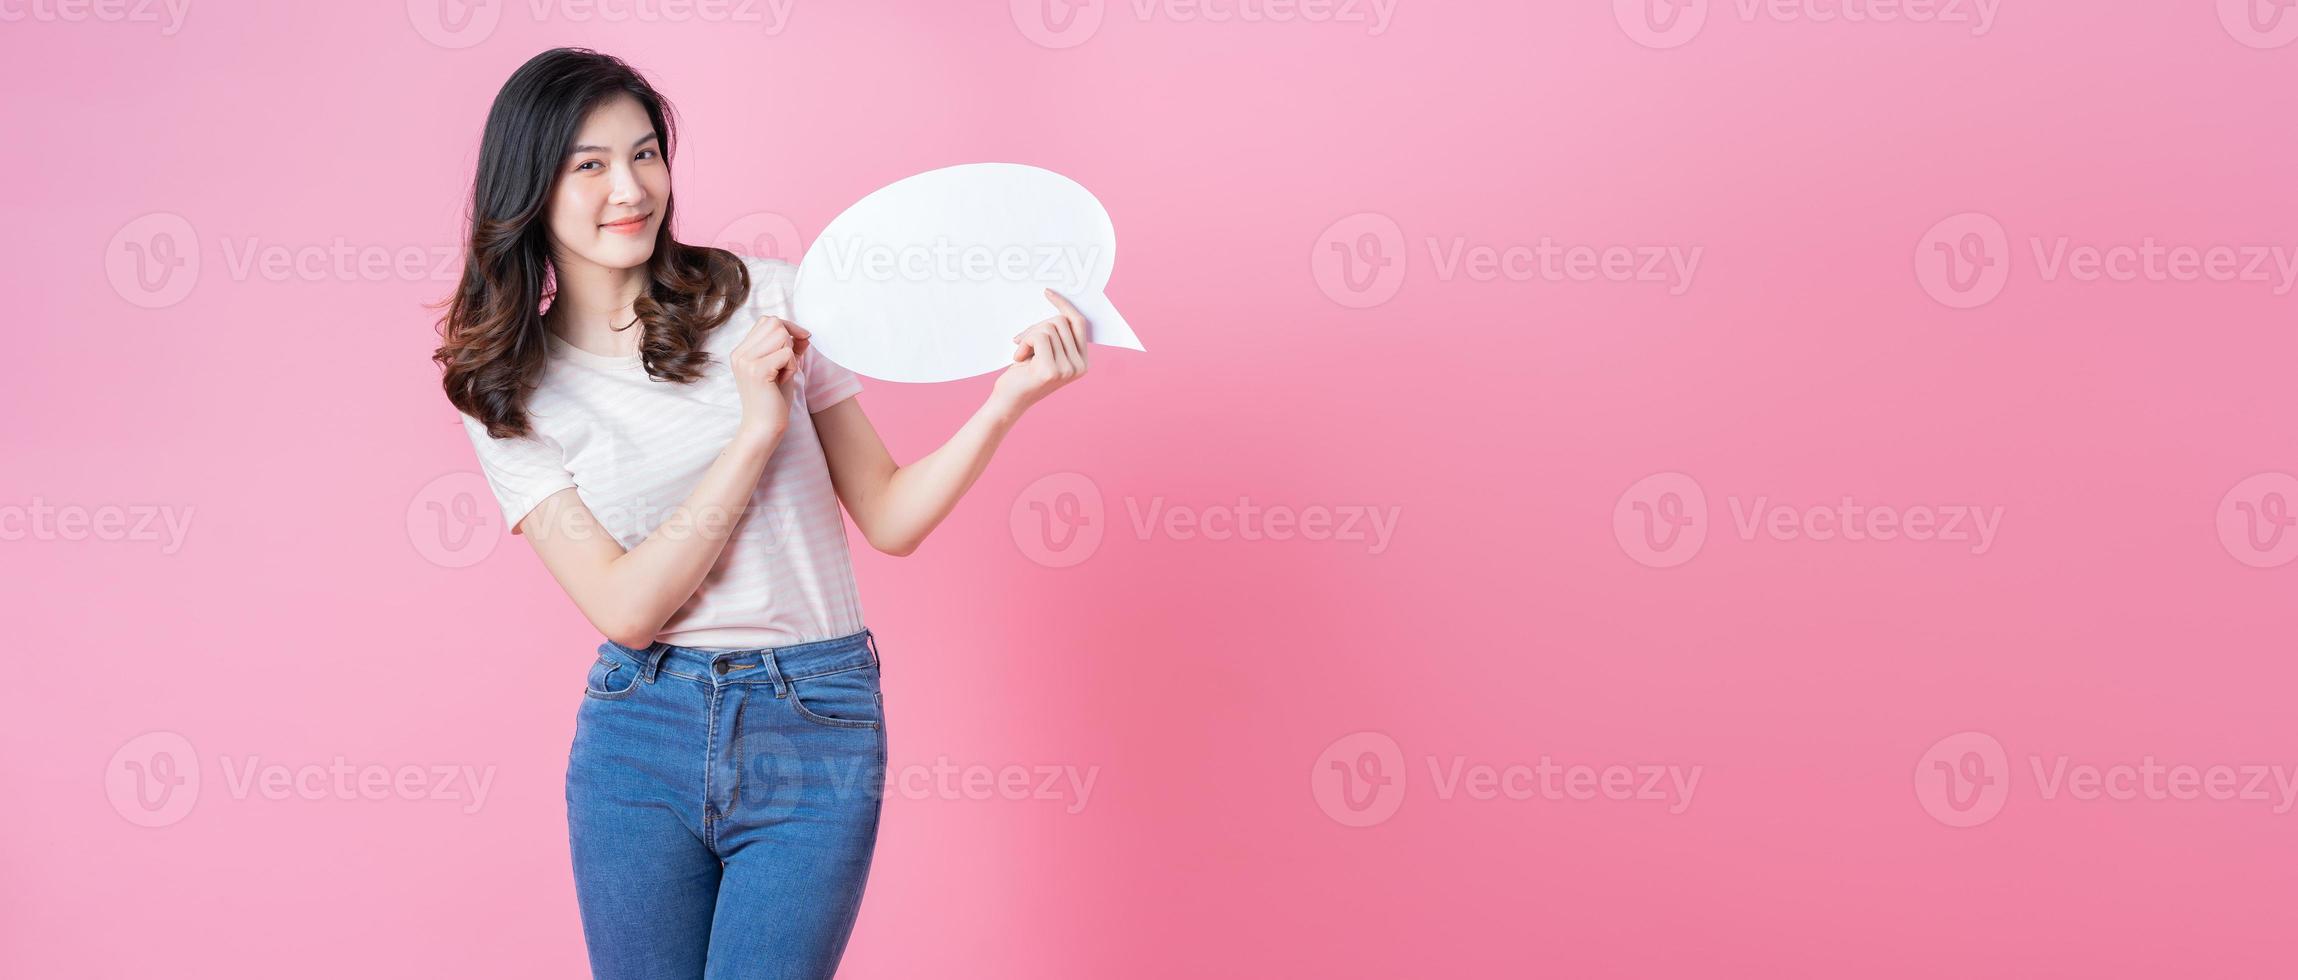 Image of young Asian woman holding message bubble on link background photo